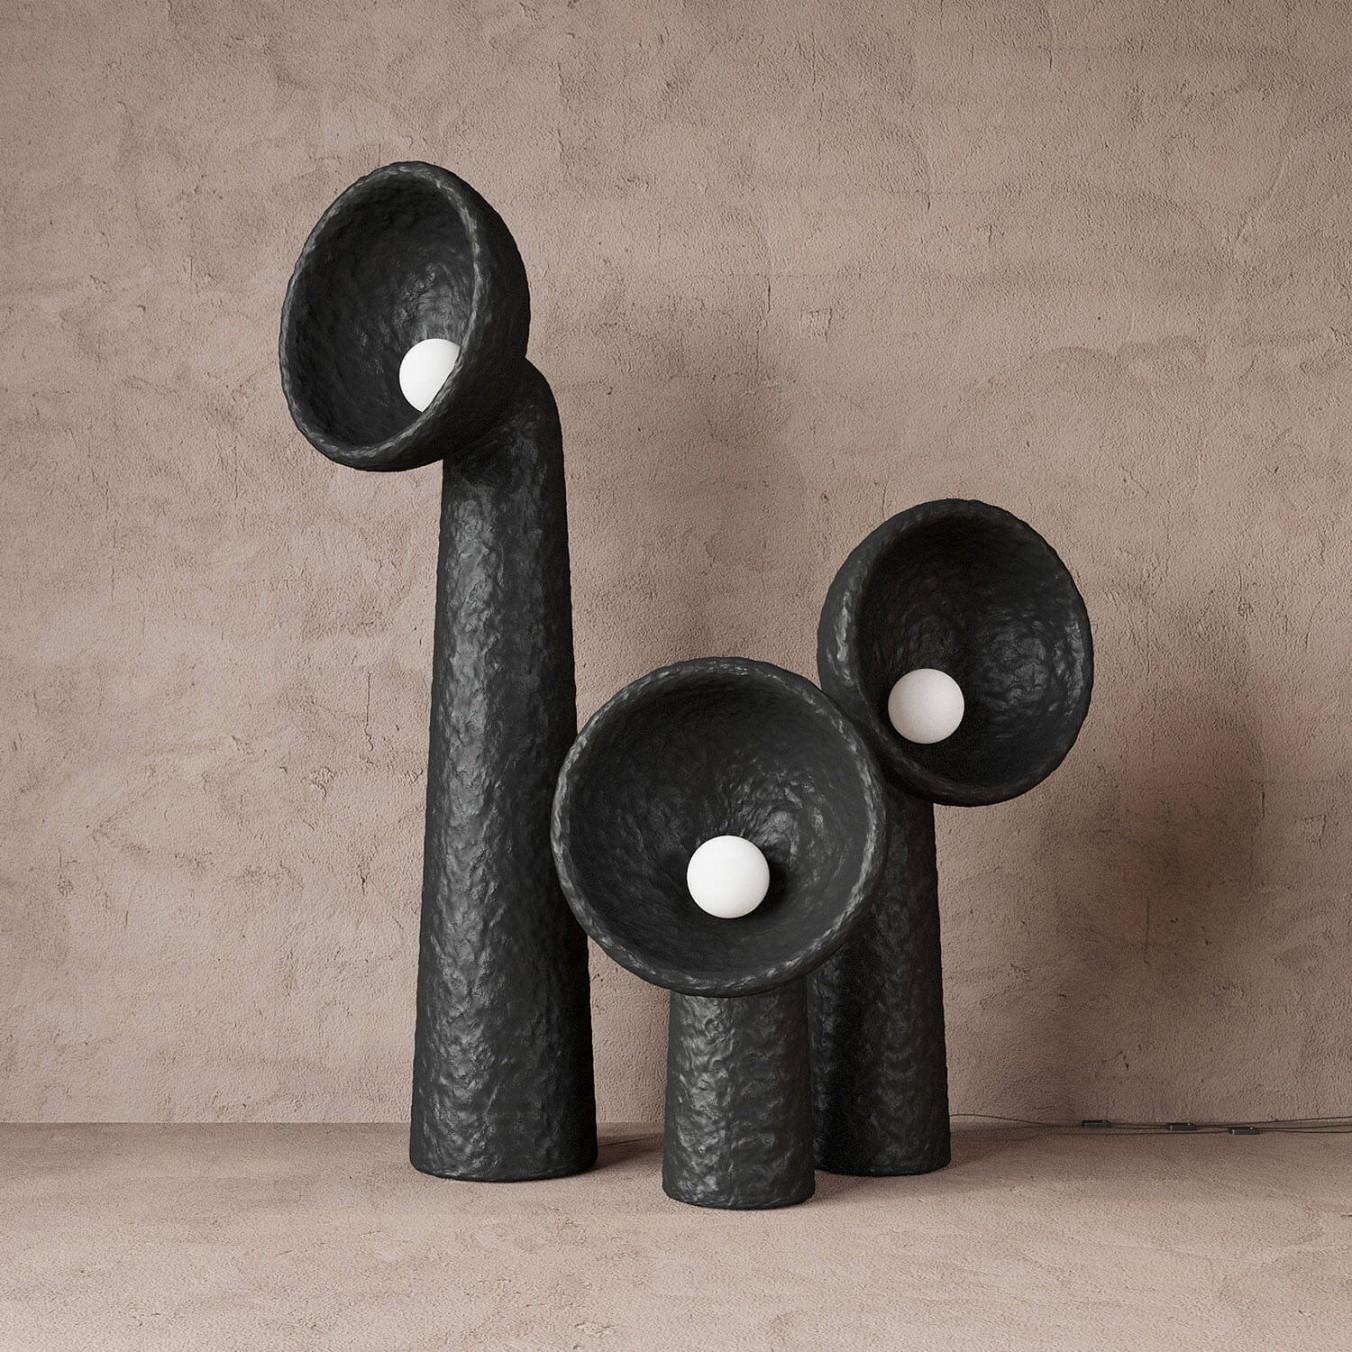 Set of 3 Contemporary Floor Lamps - Soniah by Victoriya Yakusha for Faina

Design: Victoriya Yakusha
Material: upcycled steel, flax rubber, wood chips, cellulose, and clay all with
biopolymer cover

Dimensions: 
Small: H 105 x W 60 x L 30